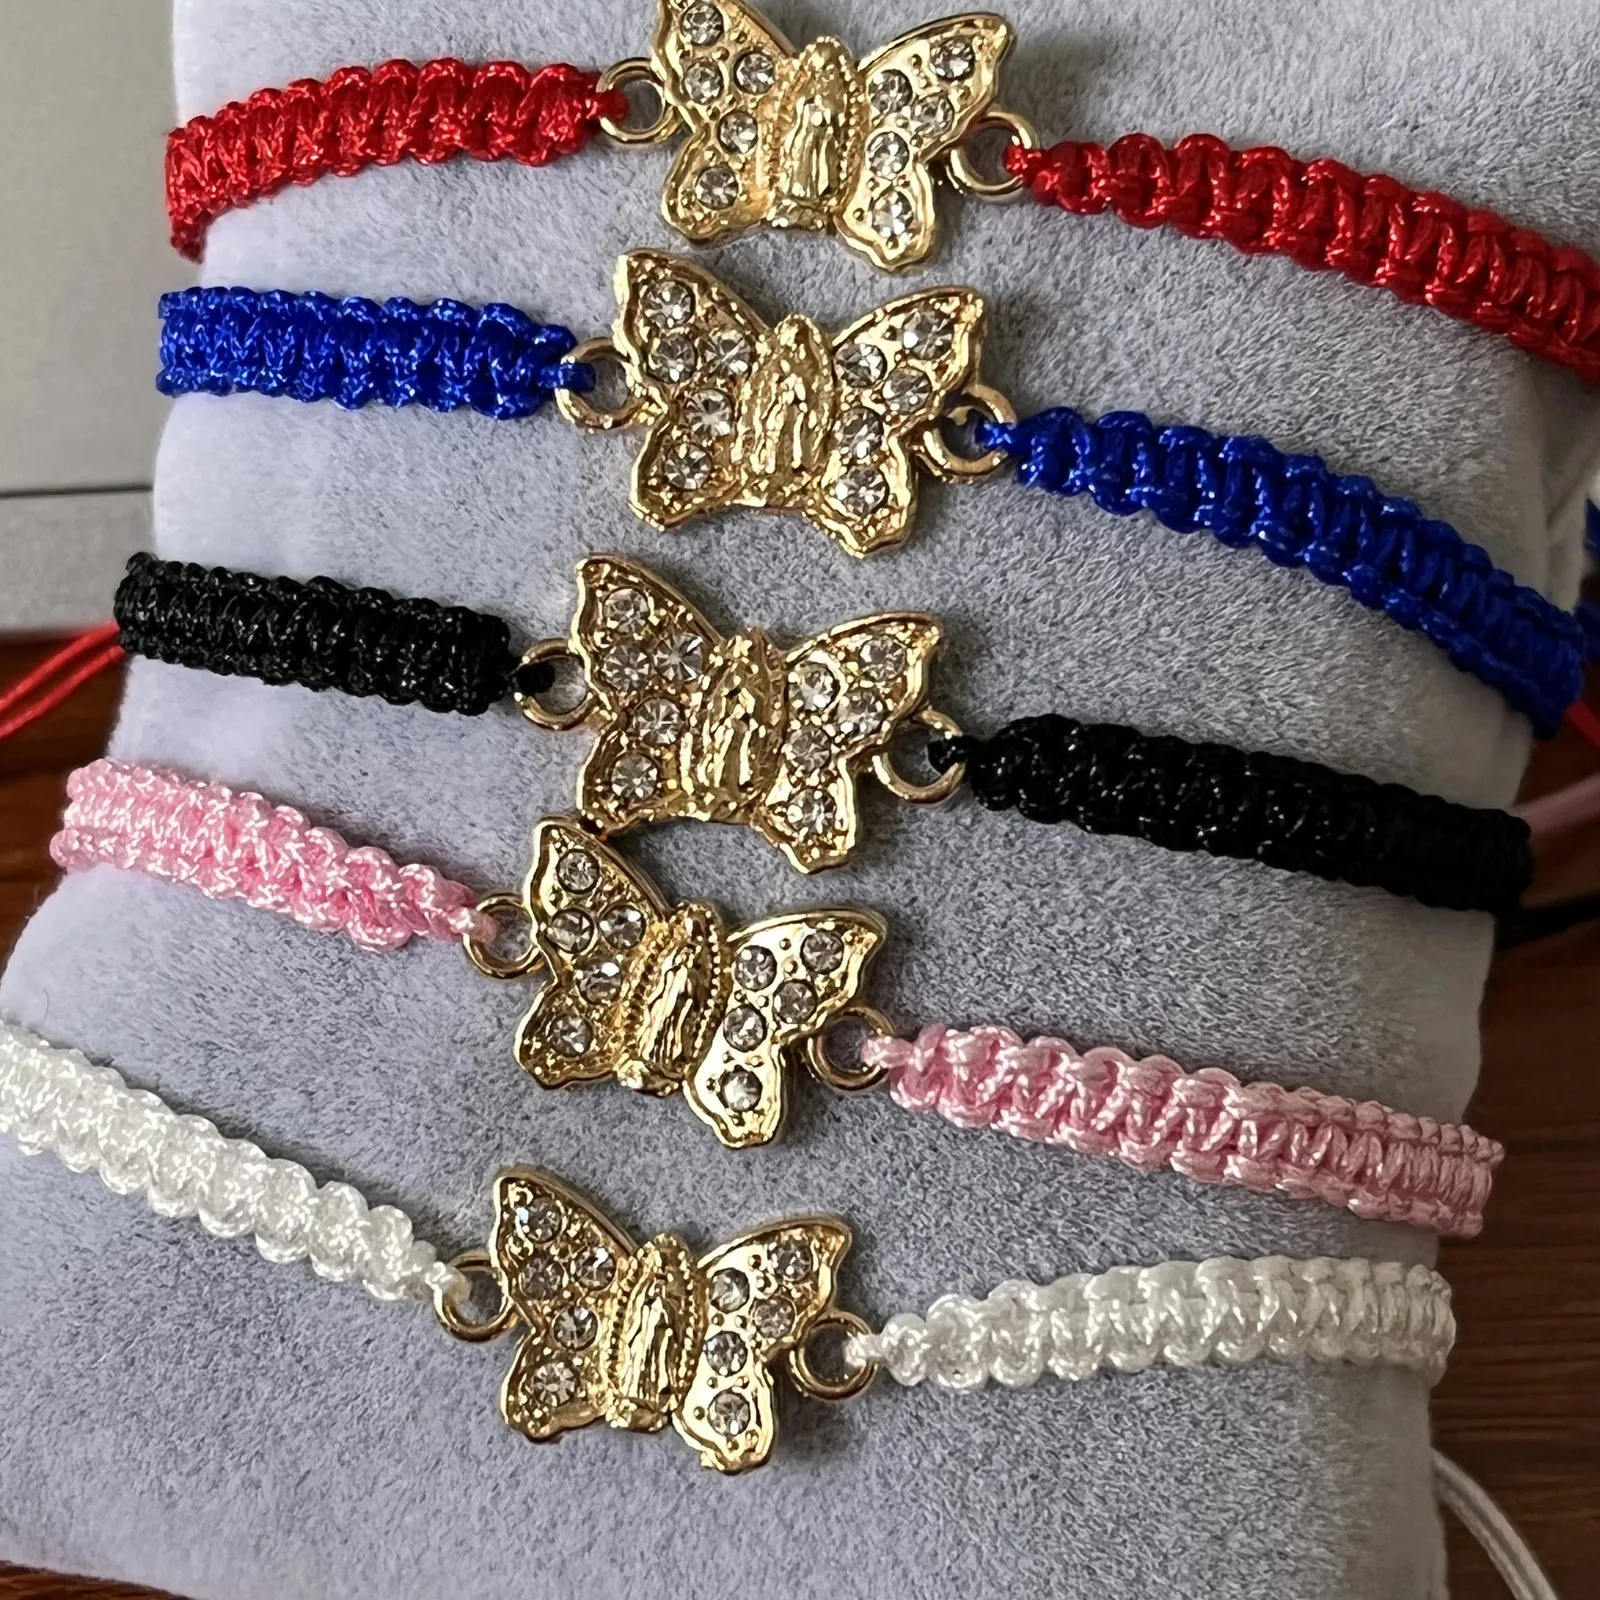 12 Piece Butterfly Charm Bracelet Handmade Braided Rope Thread Fashion Adjustable Bracelets Bangles Lucky Jewelry Friends Gift 240109